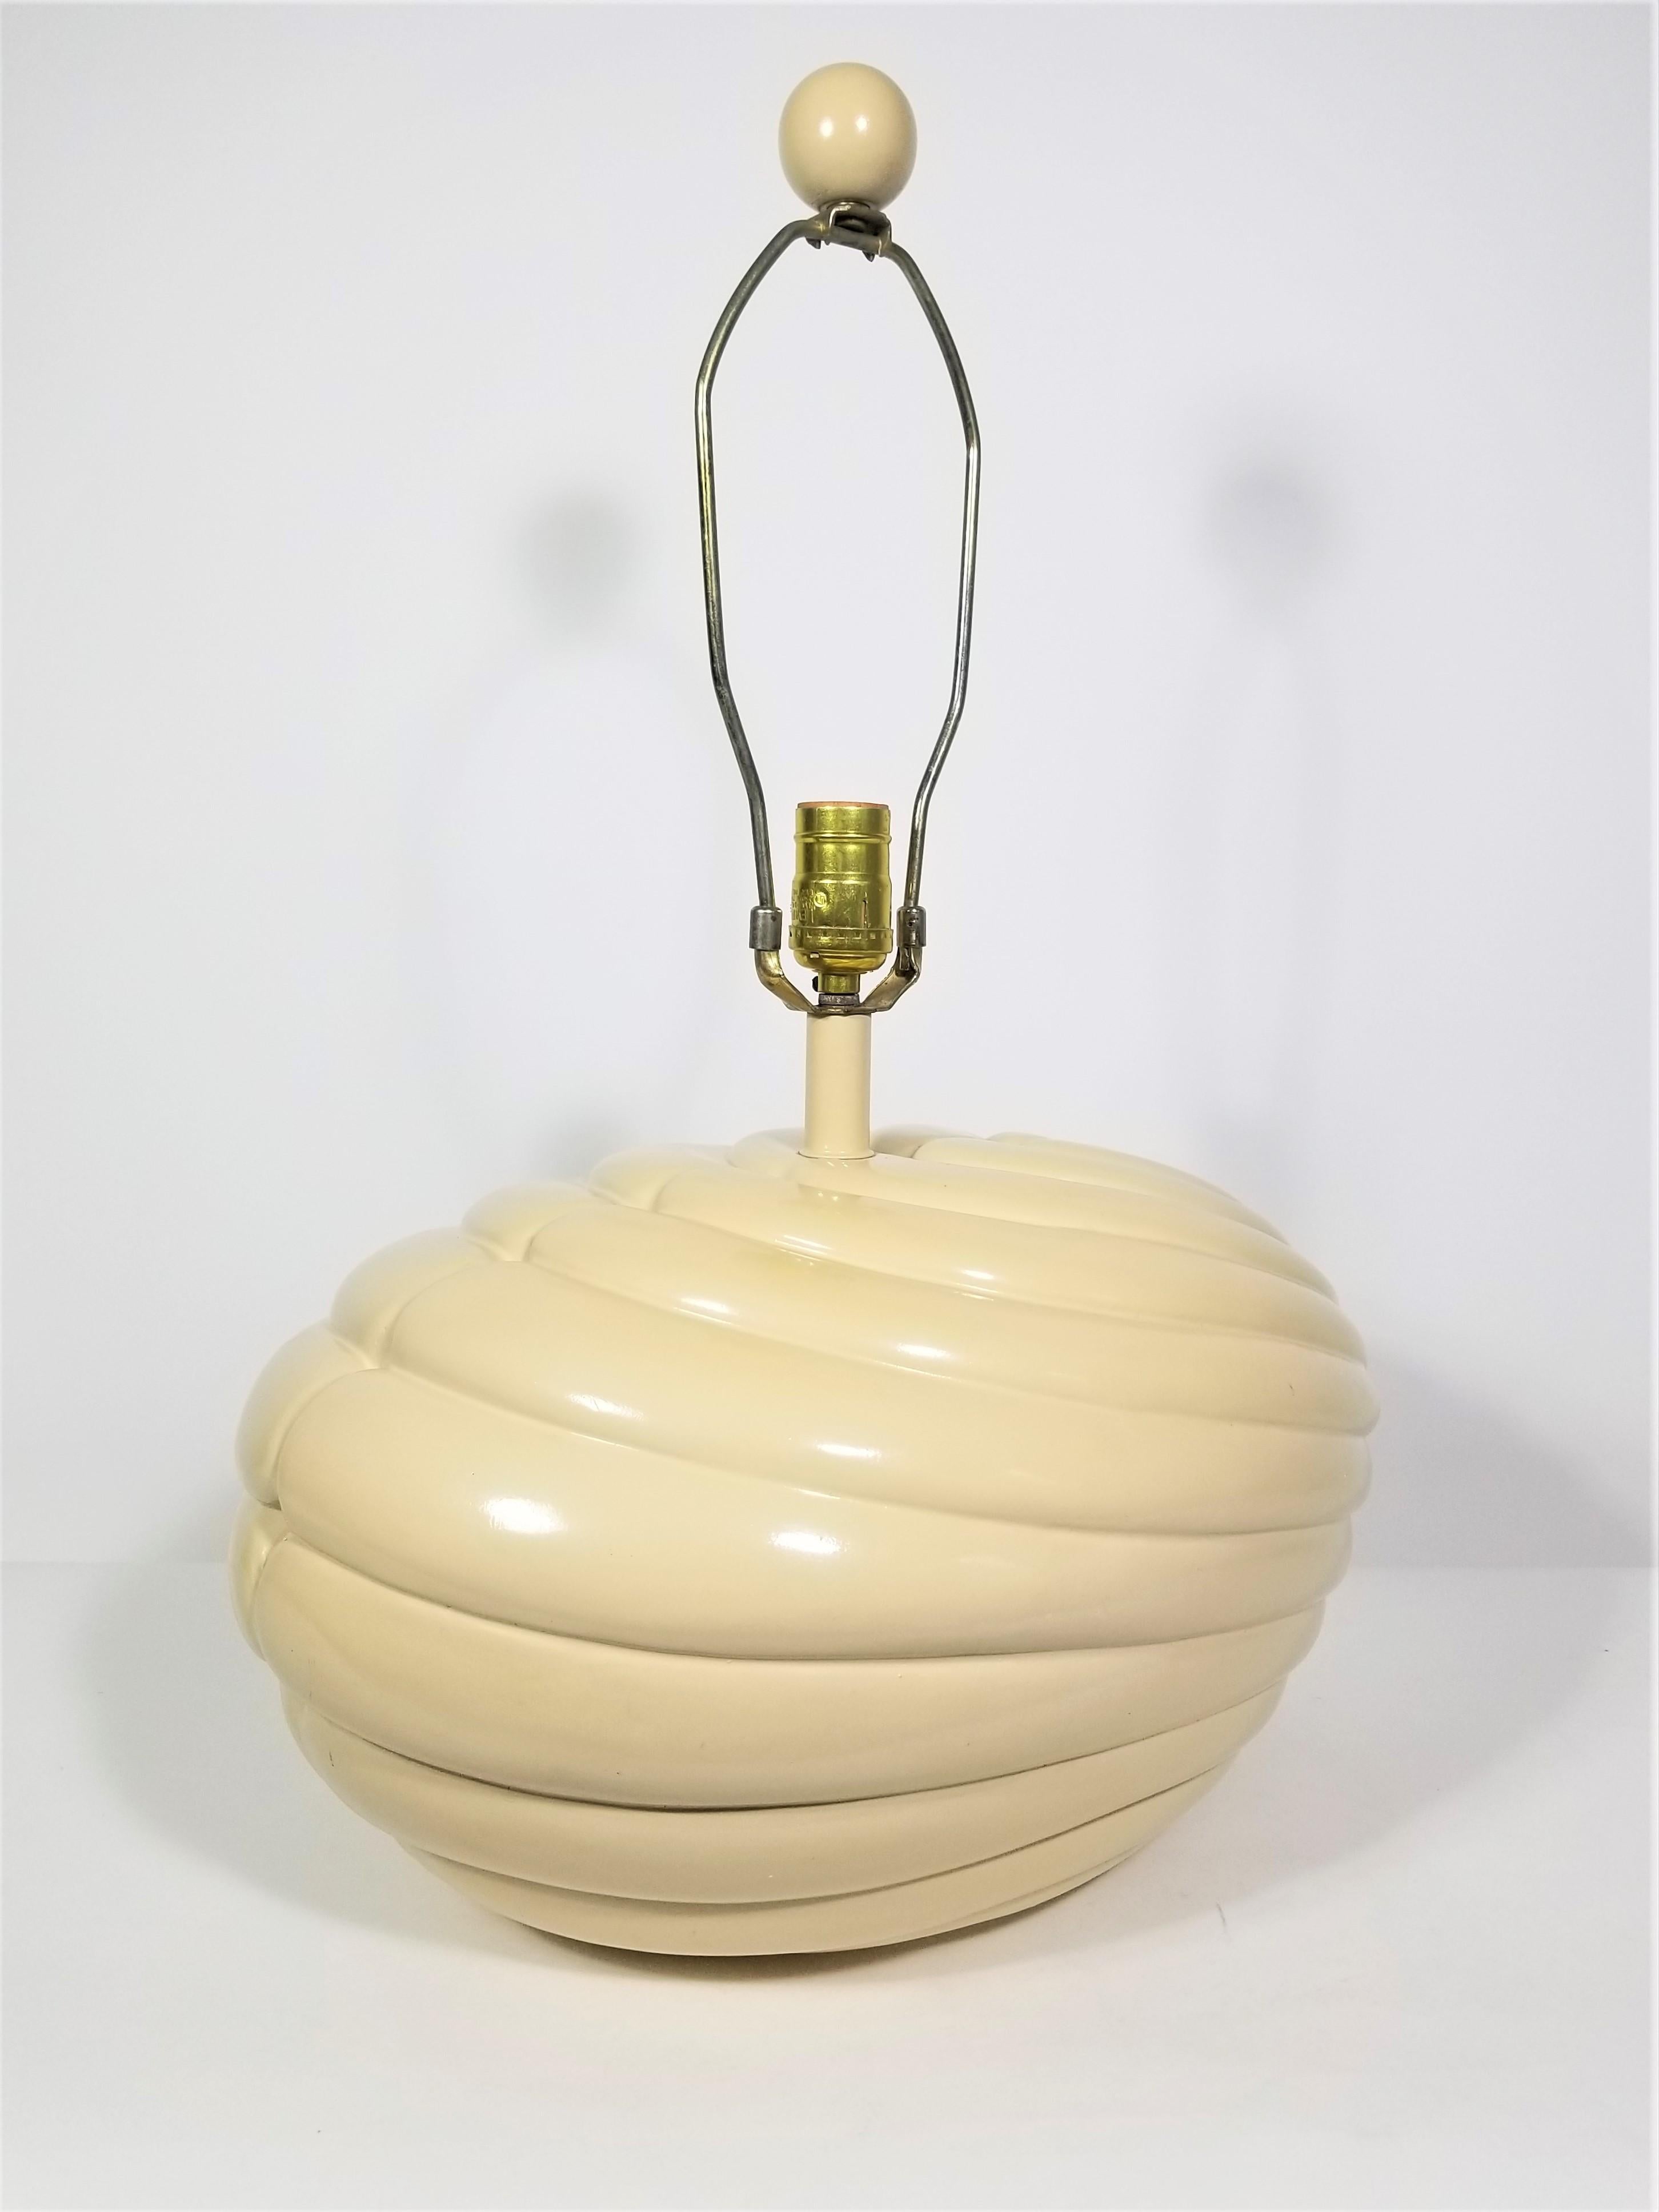 Ceramic 1980s Large Off White Shell Inspired Sculptural Table Lamp